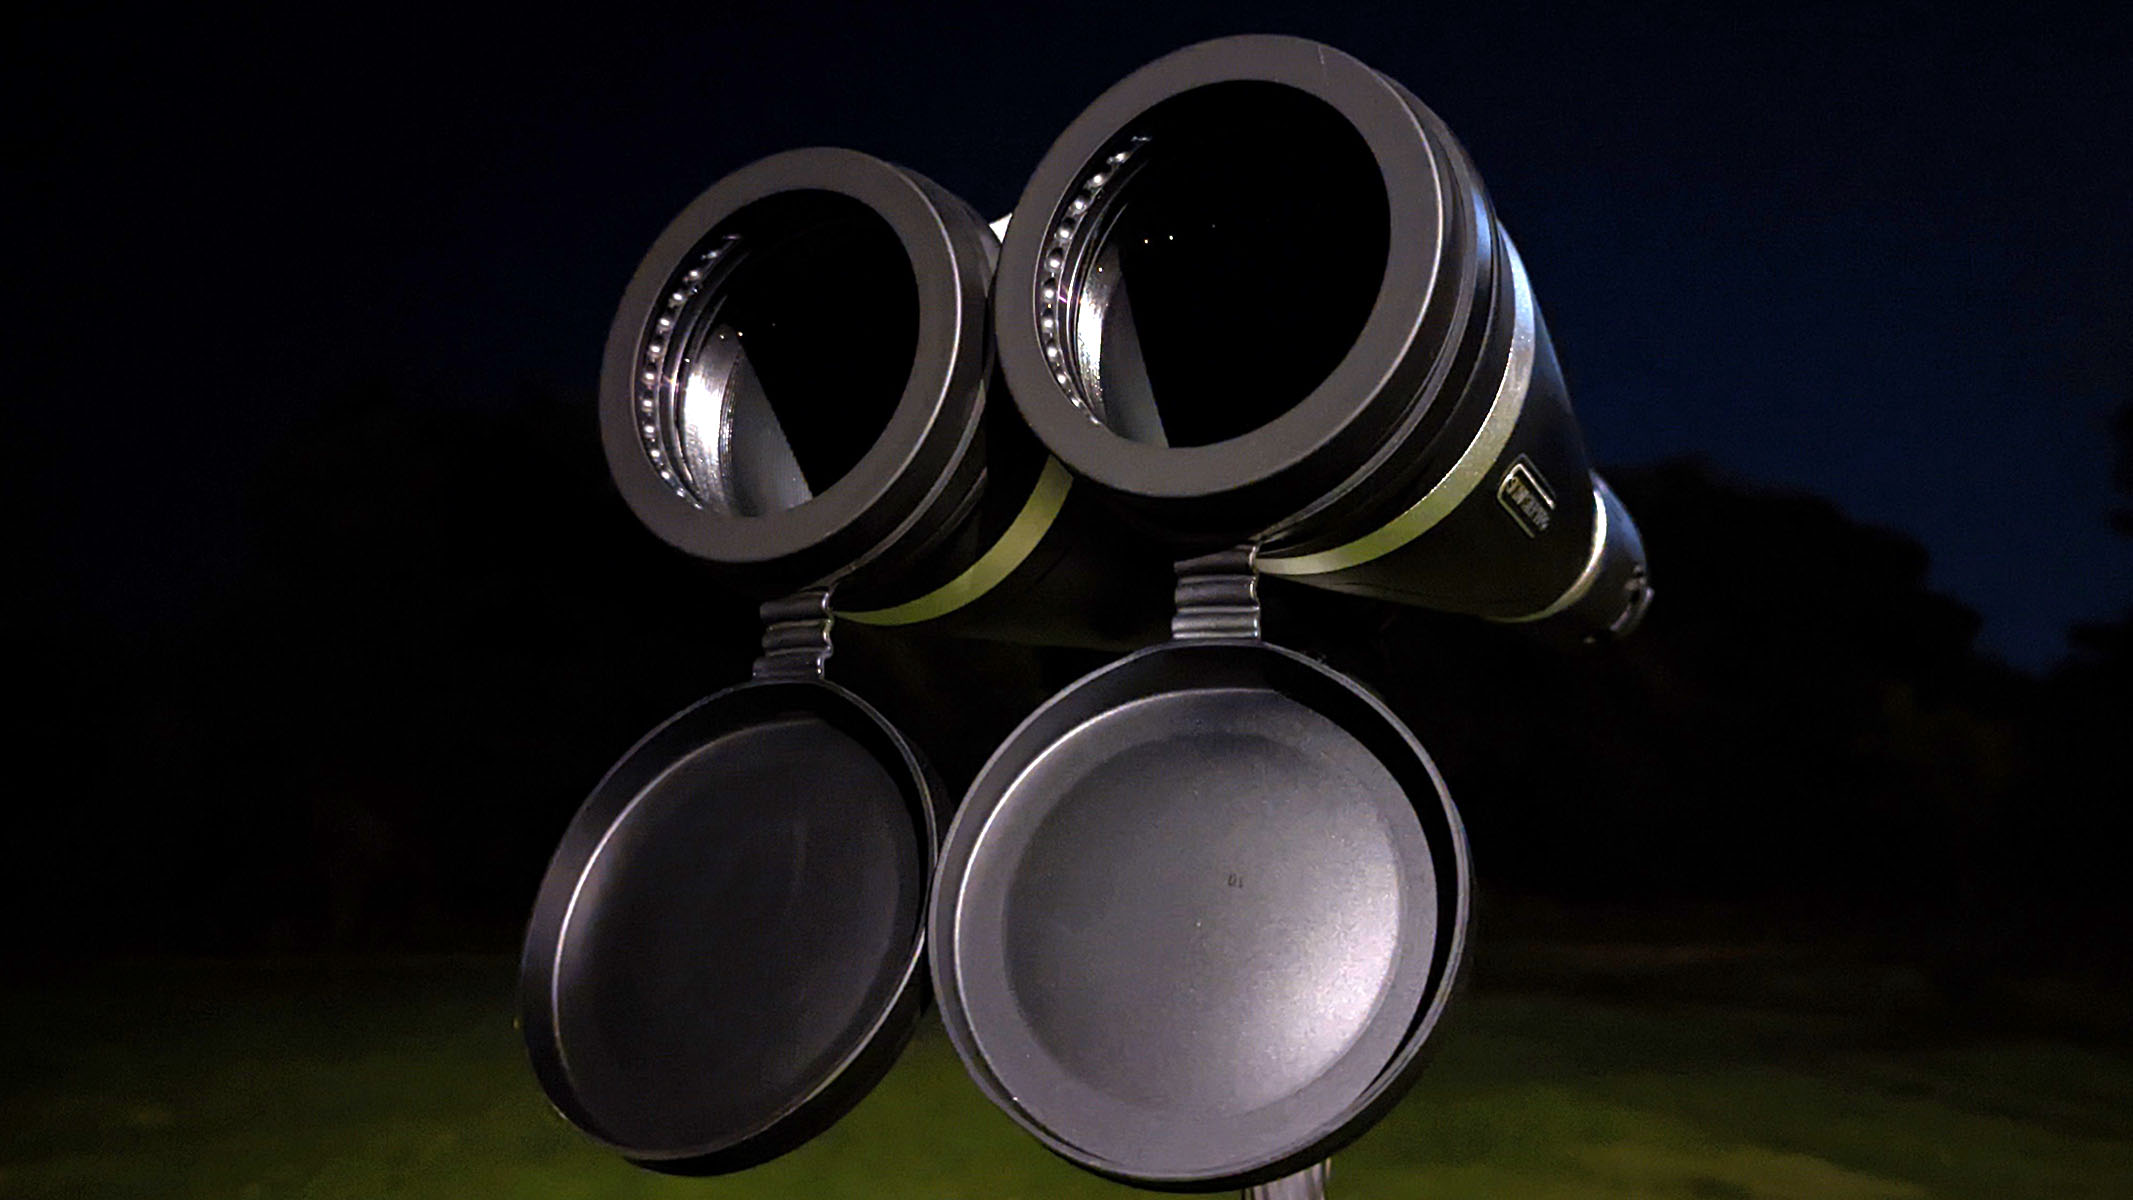 The objective lenses with lens caps attached